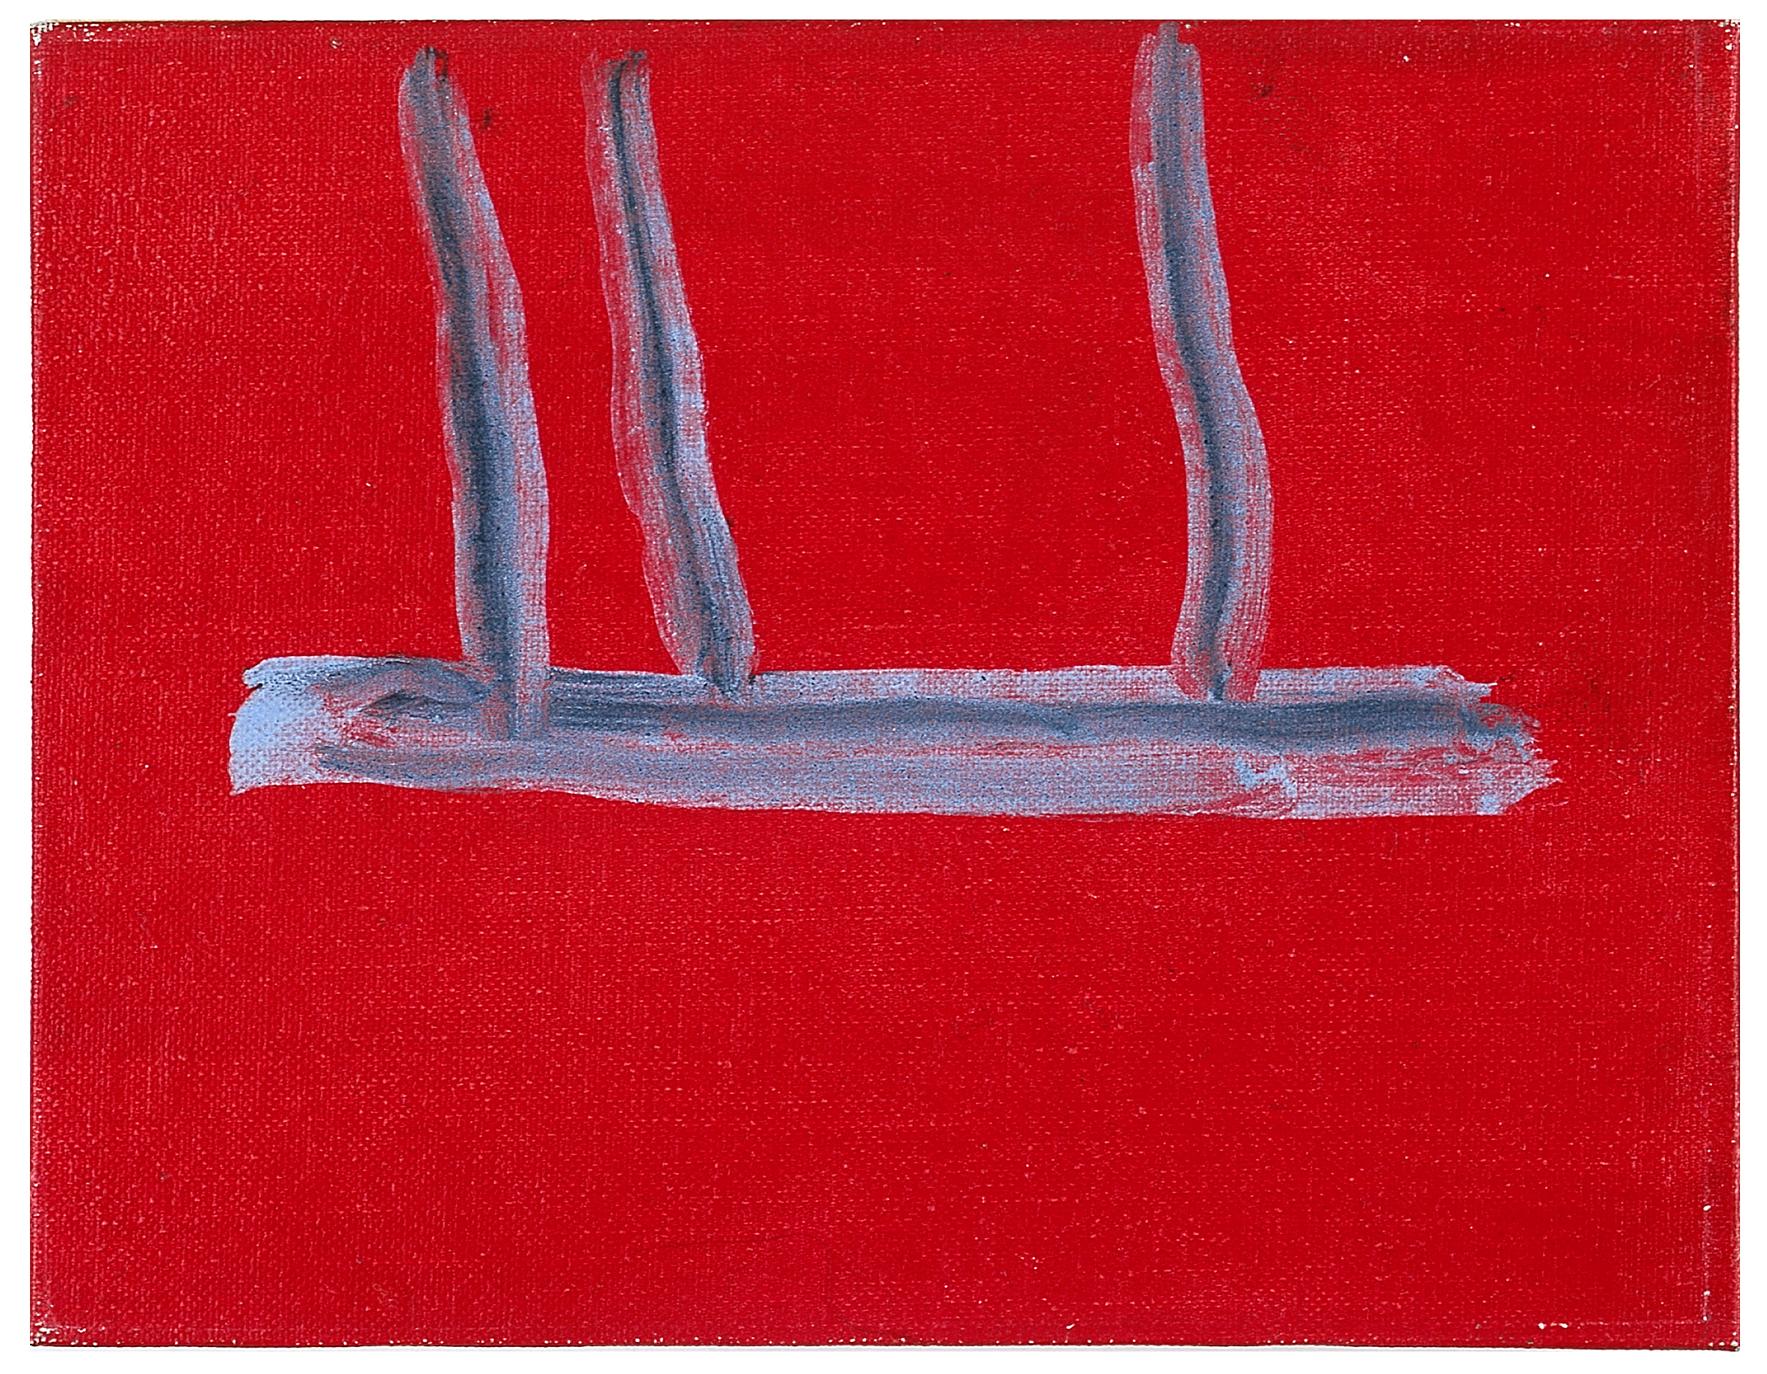 Untitled (Red Open)